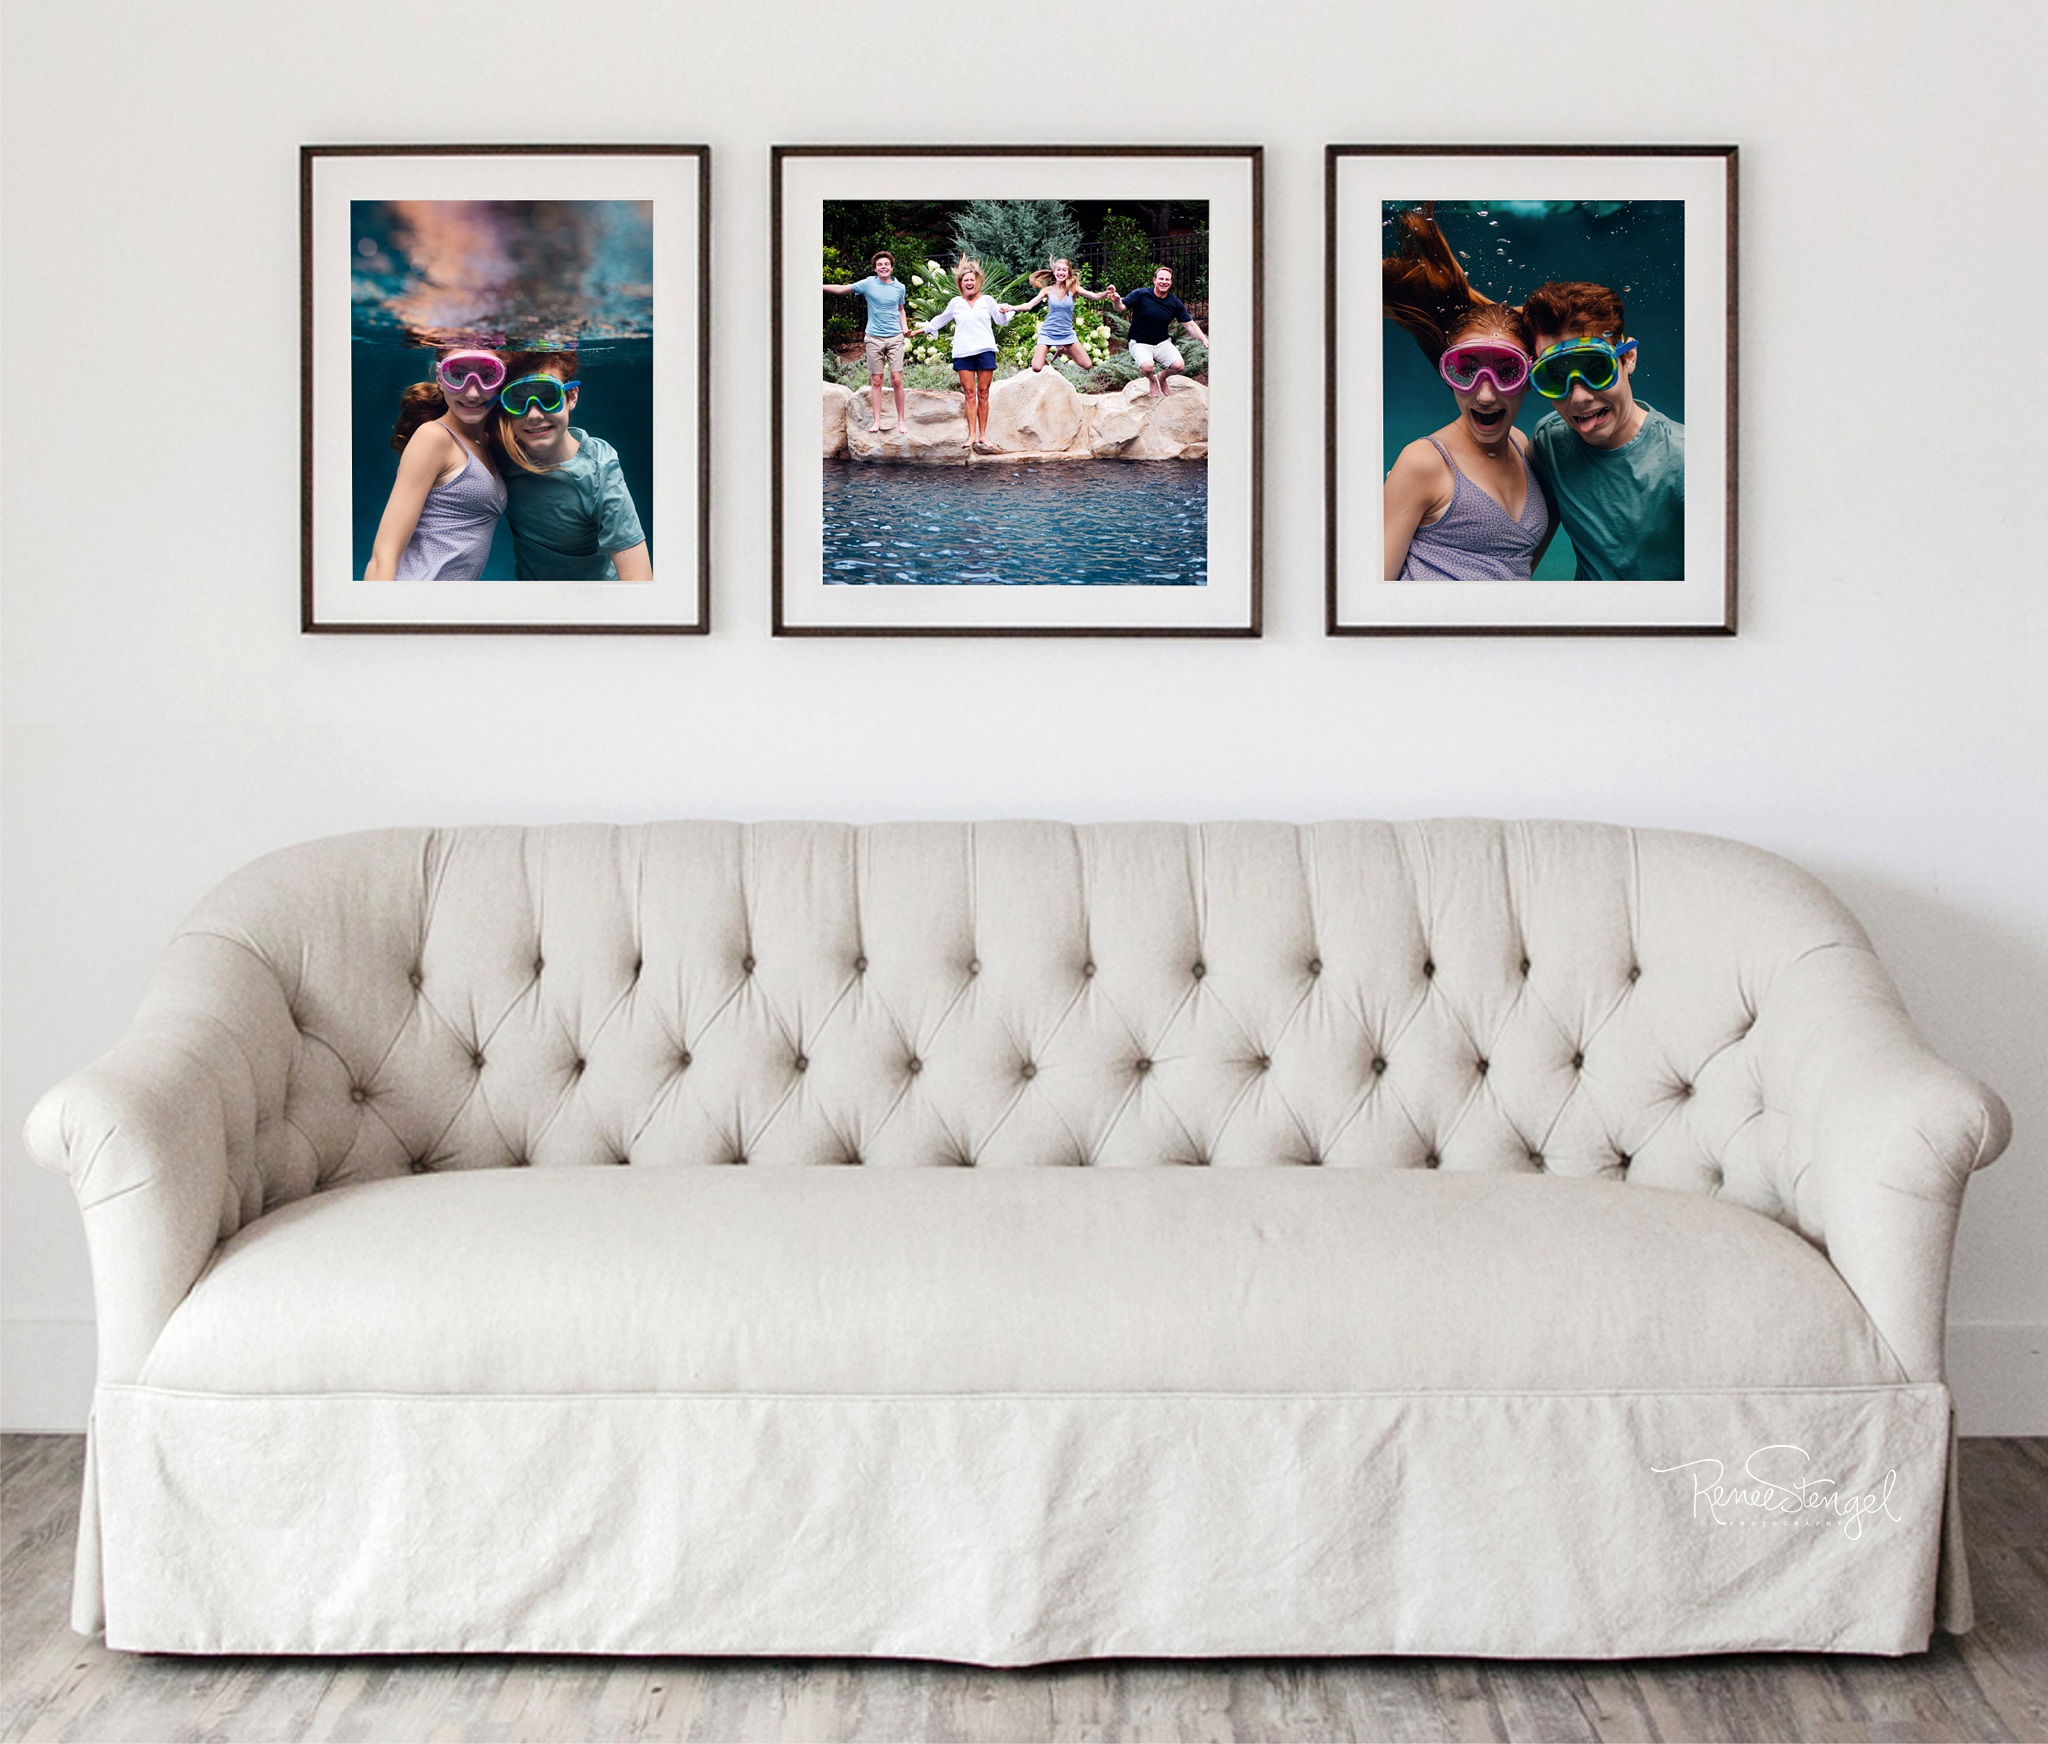 Underwater Photography Wall Art Framing Options